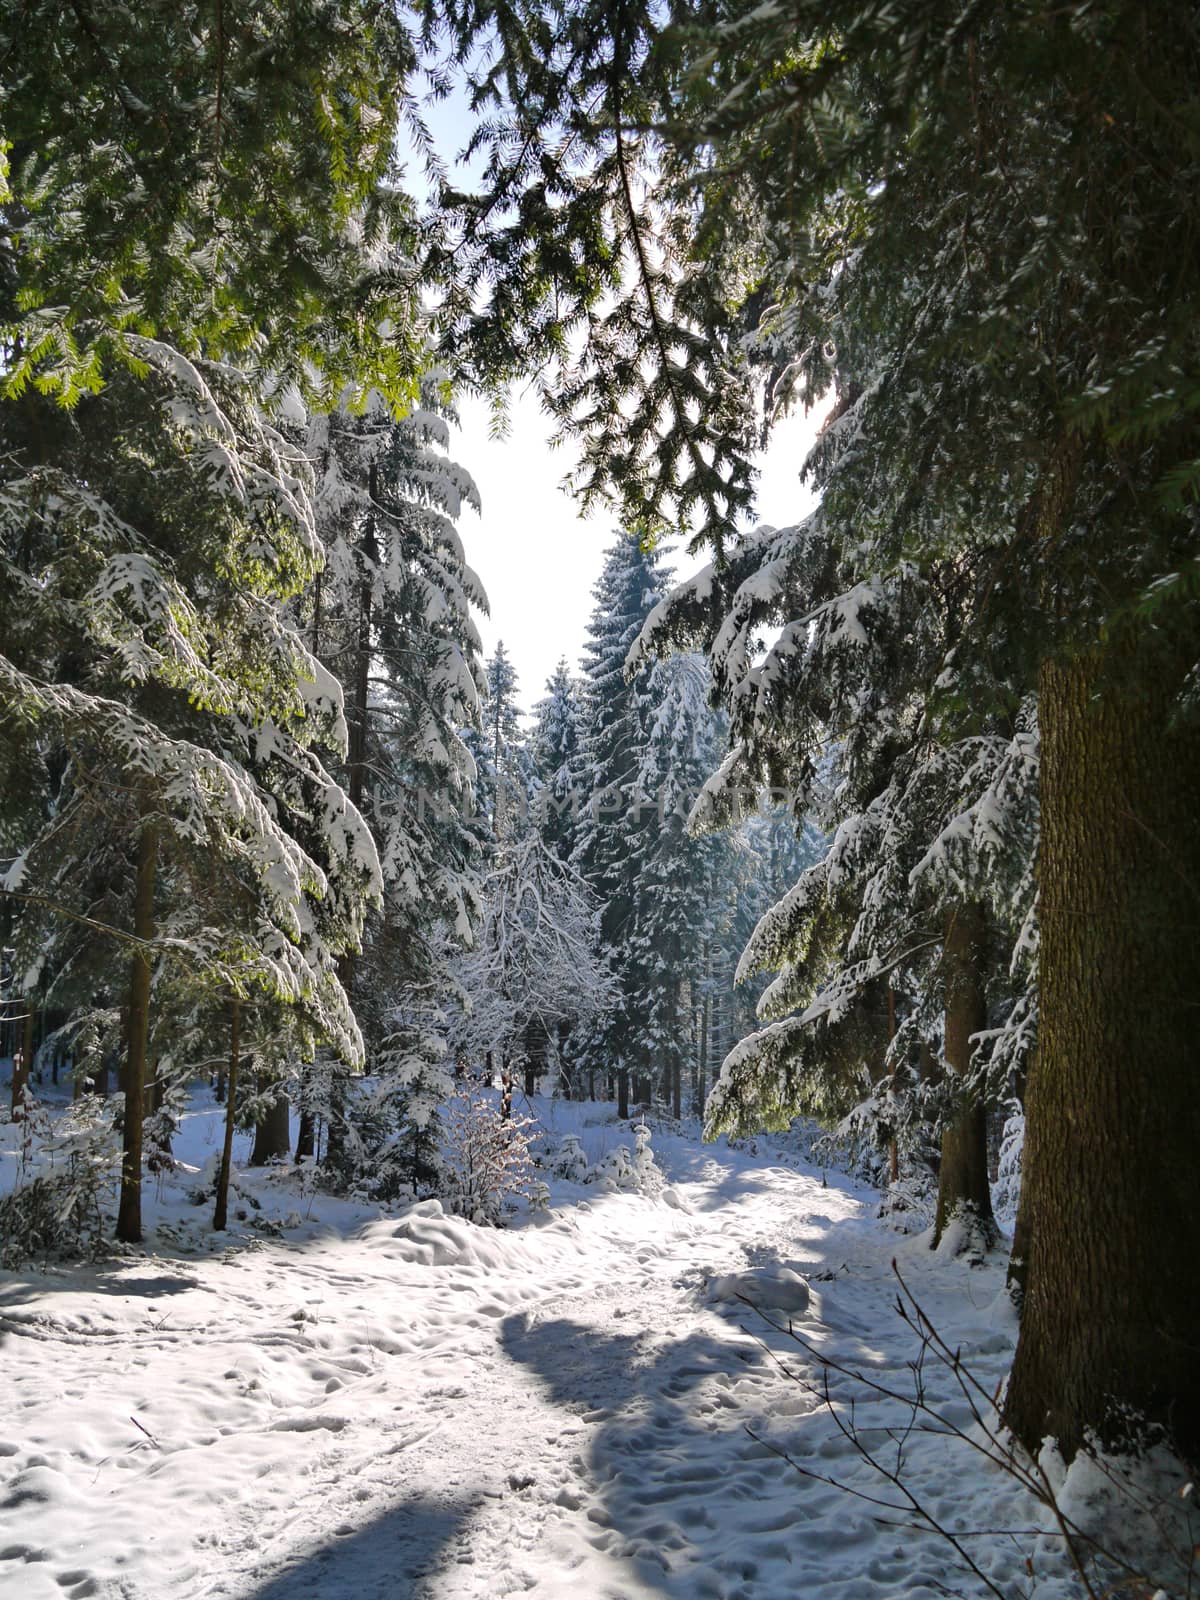 Snow-covered forest path with tall trees on either side in the rays of sunlight by Adamchuk